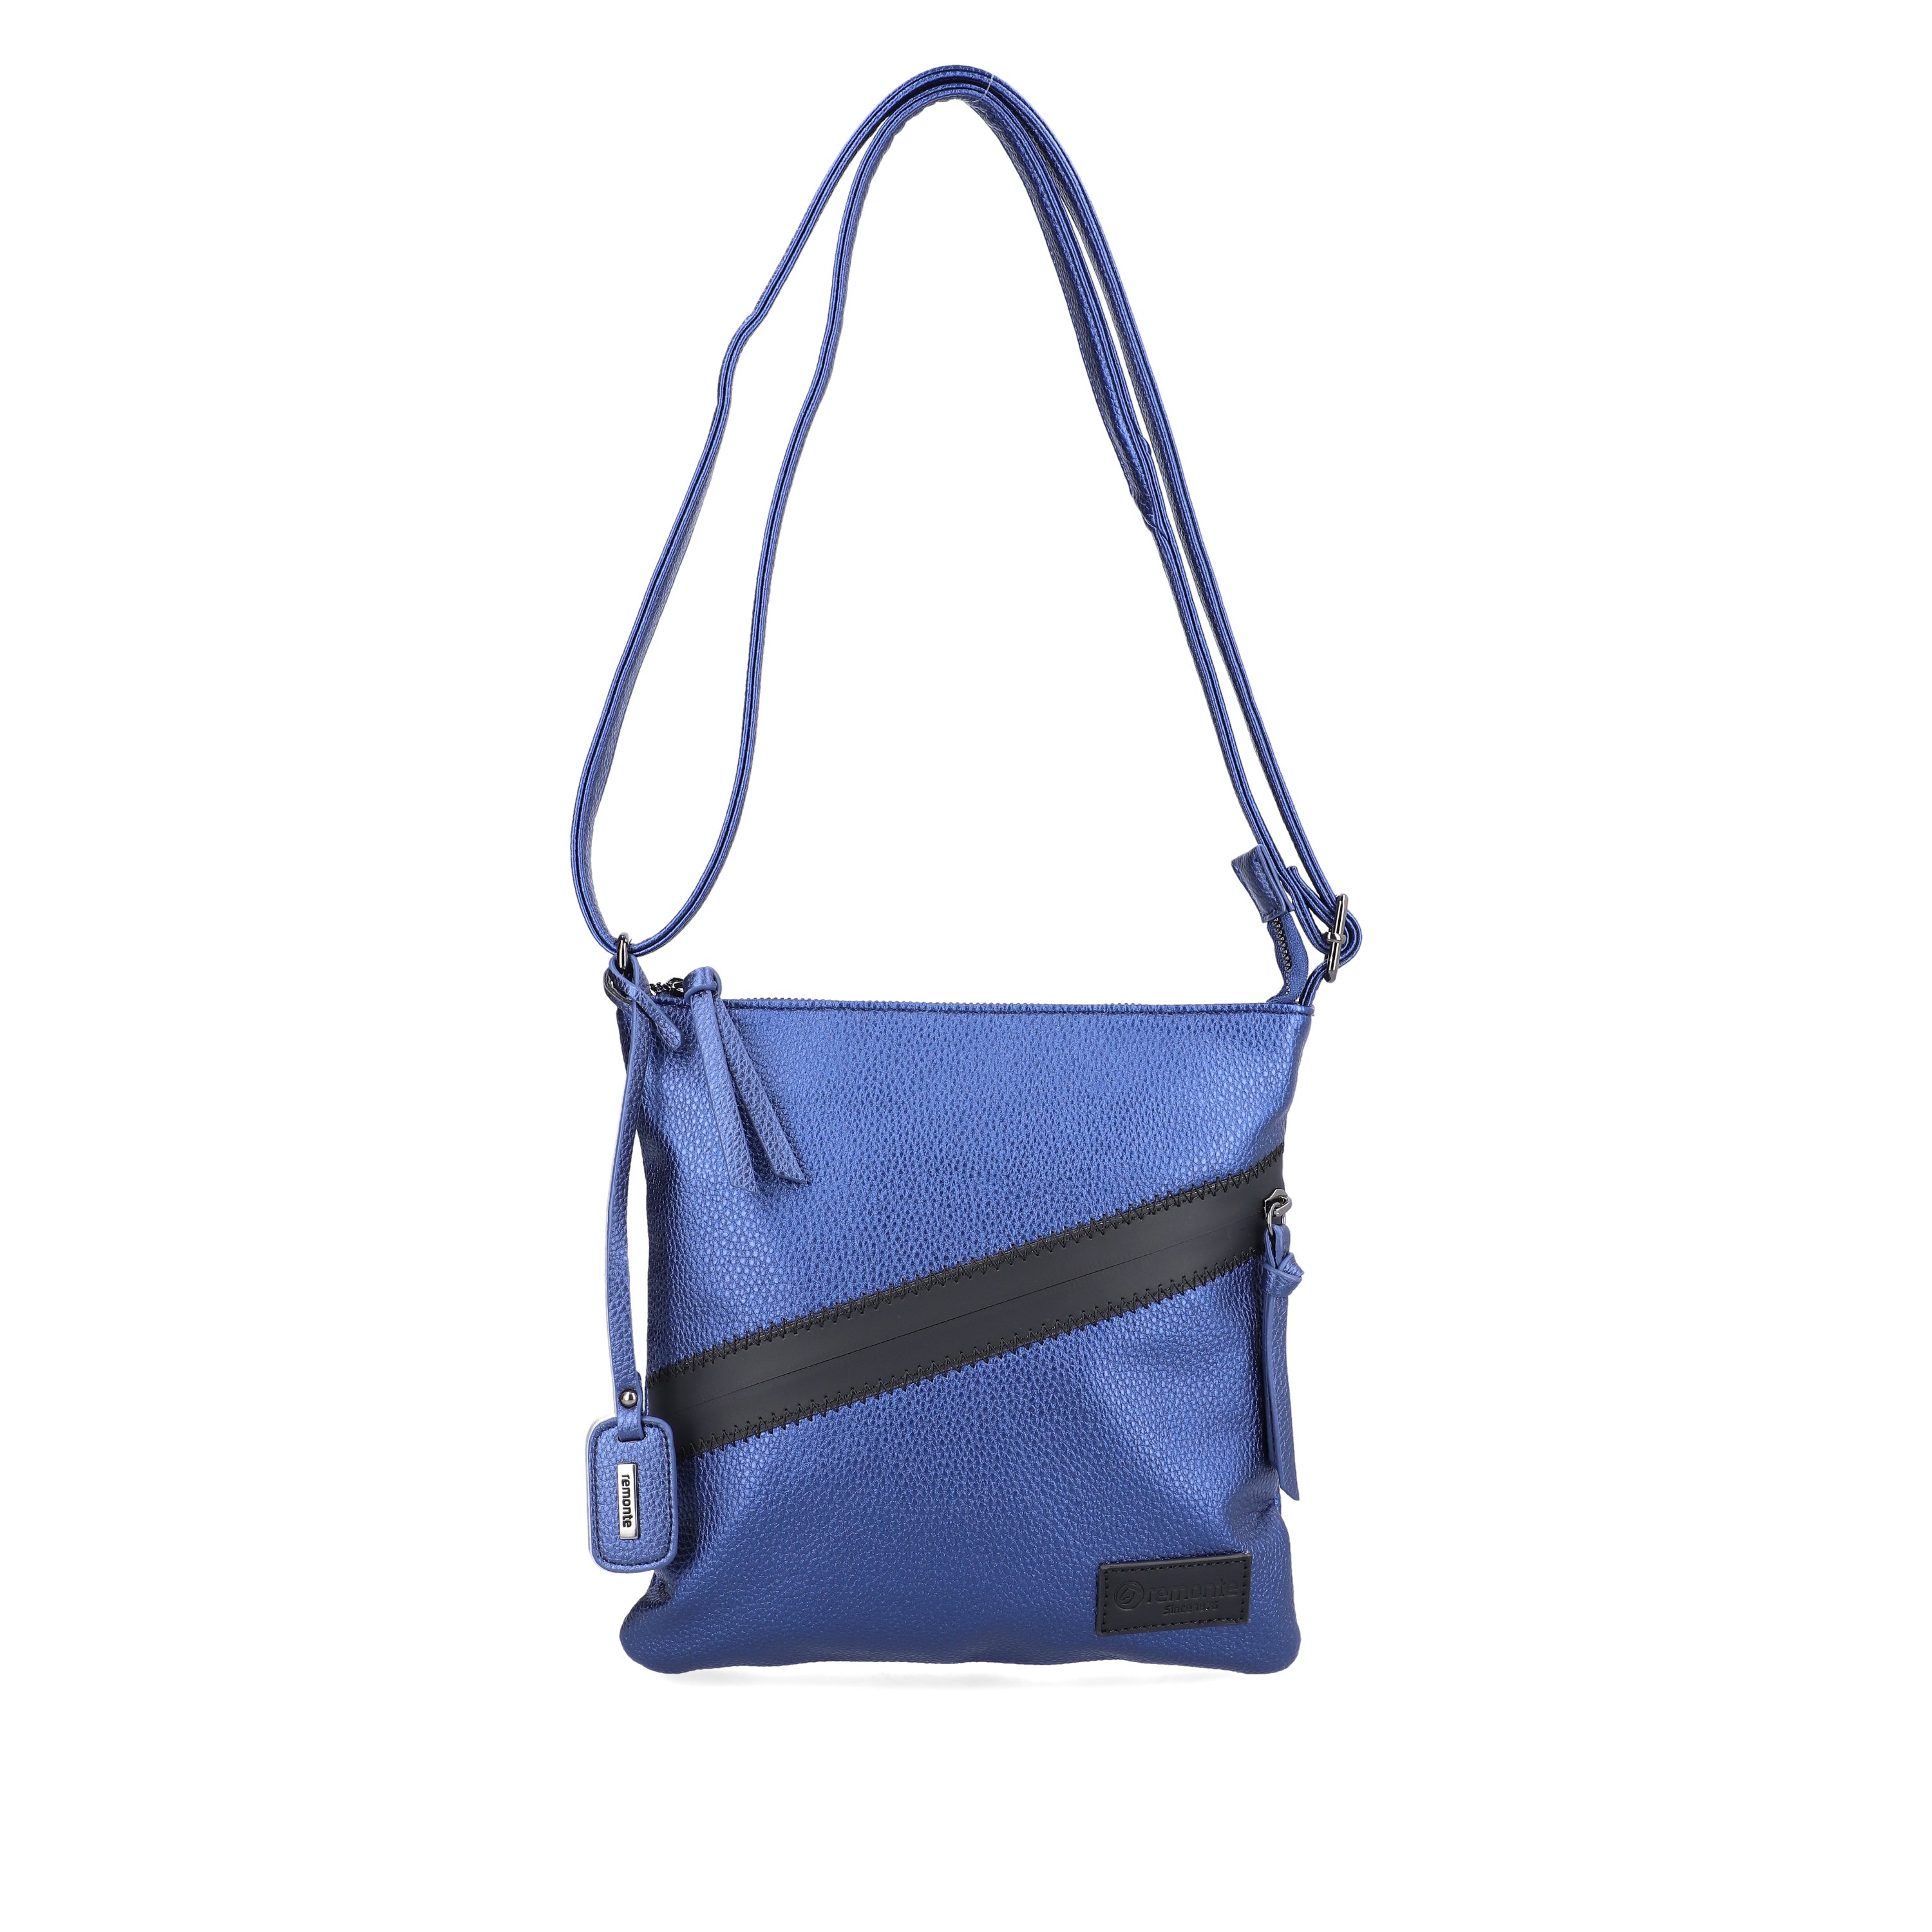 remonte women´s bag Q0625-14 in blue made of imitation leather with zipper from the front.